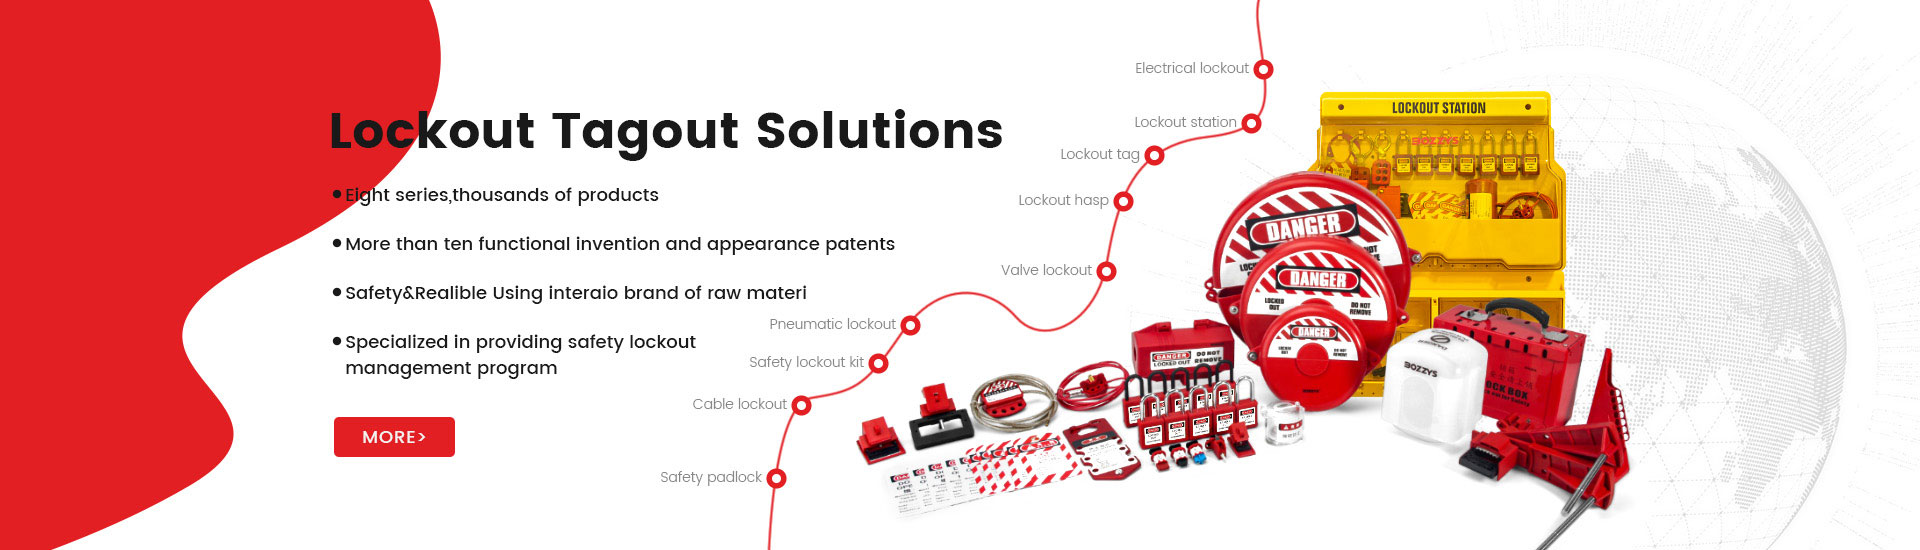 Lockout Tagout Solutions